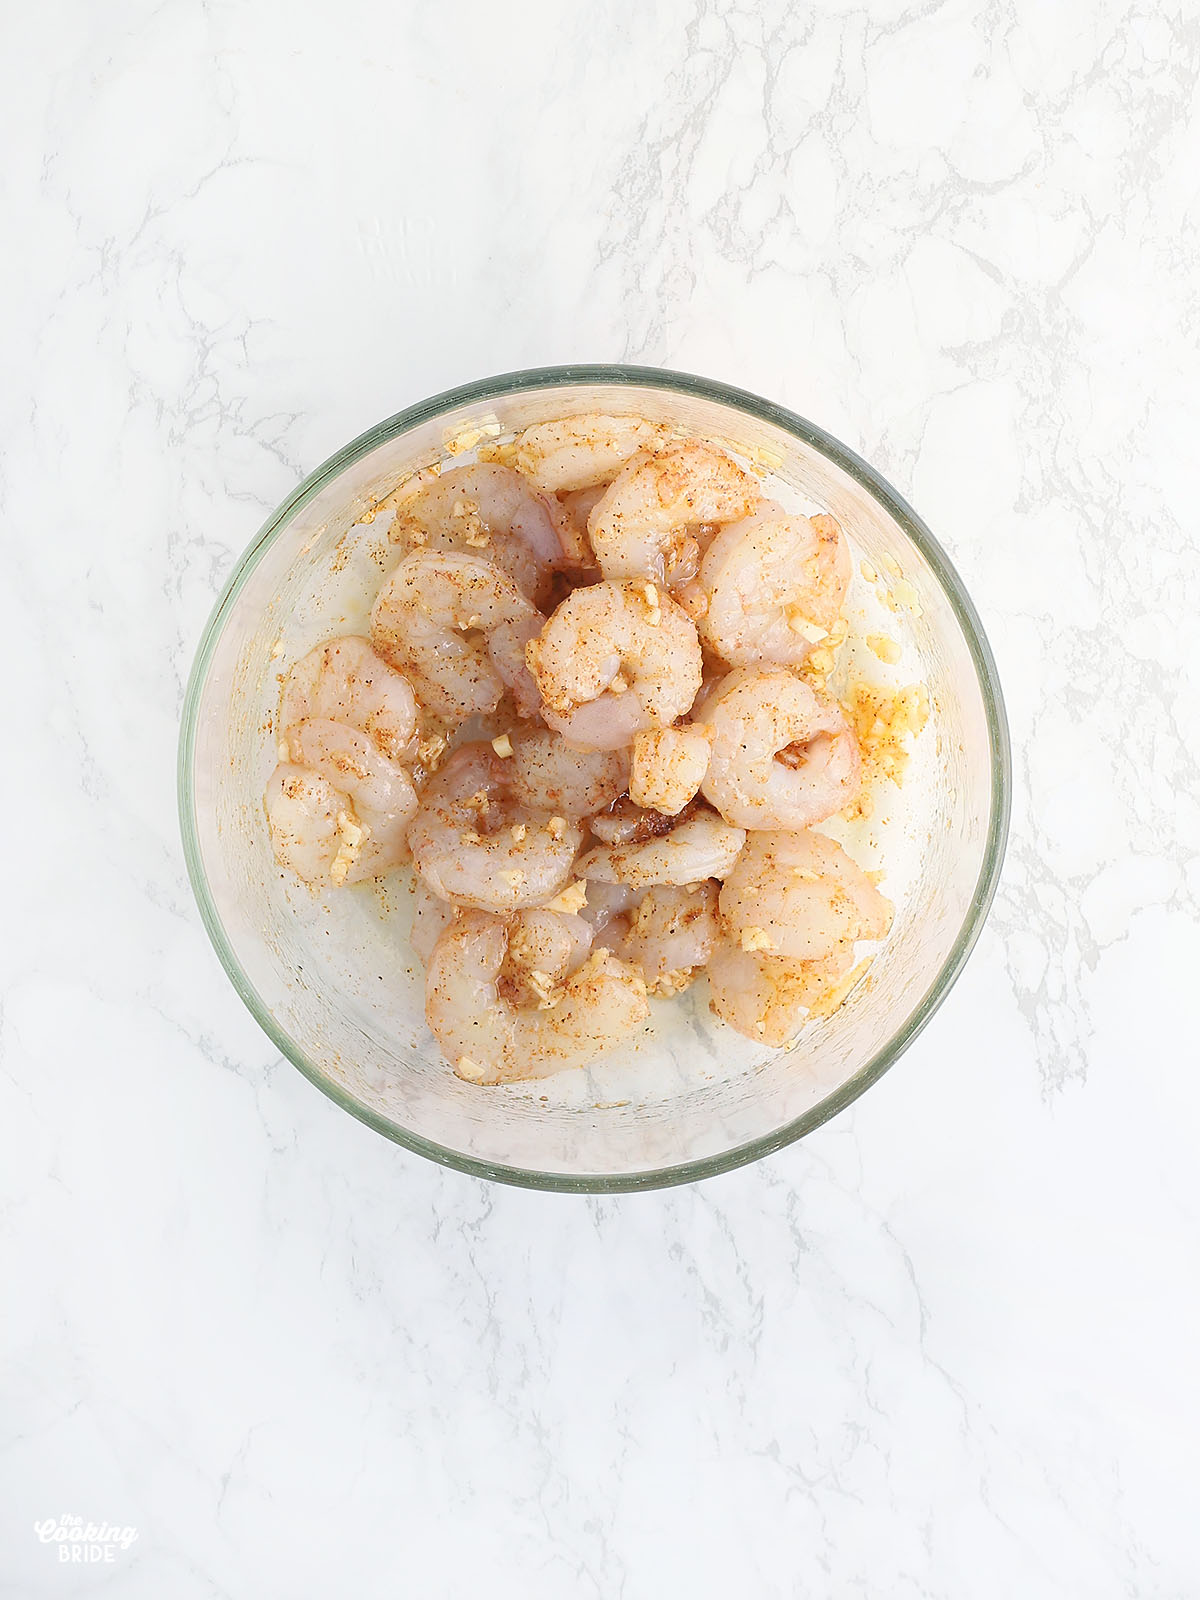 shrimp seasoned with olive oil, minced garlic and Cajun seasoning in a glass bowl